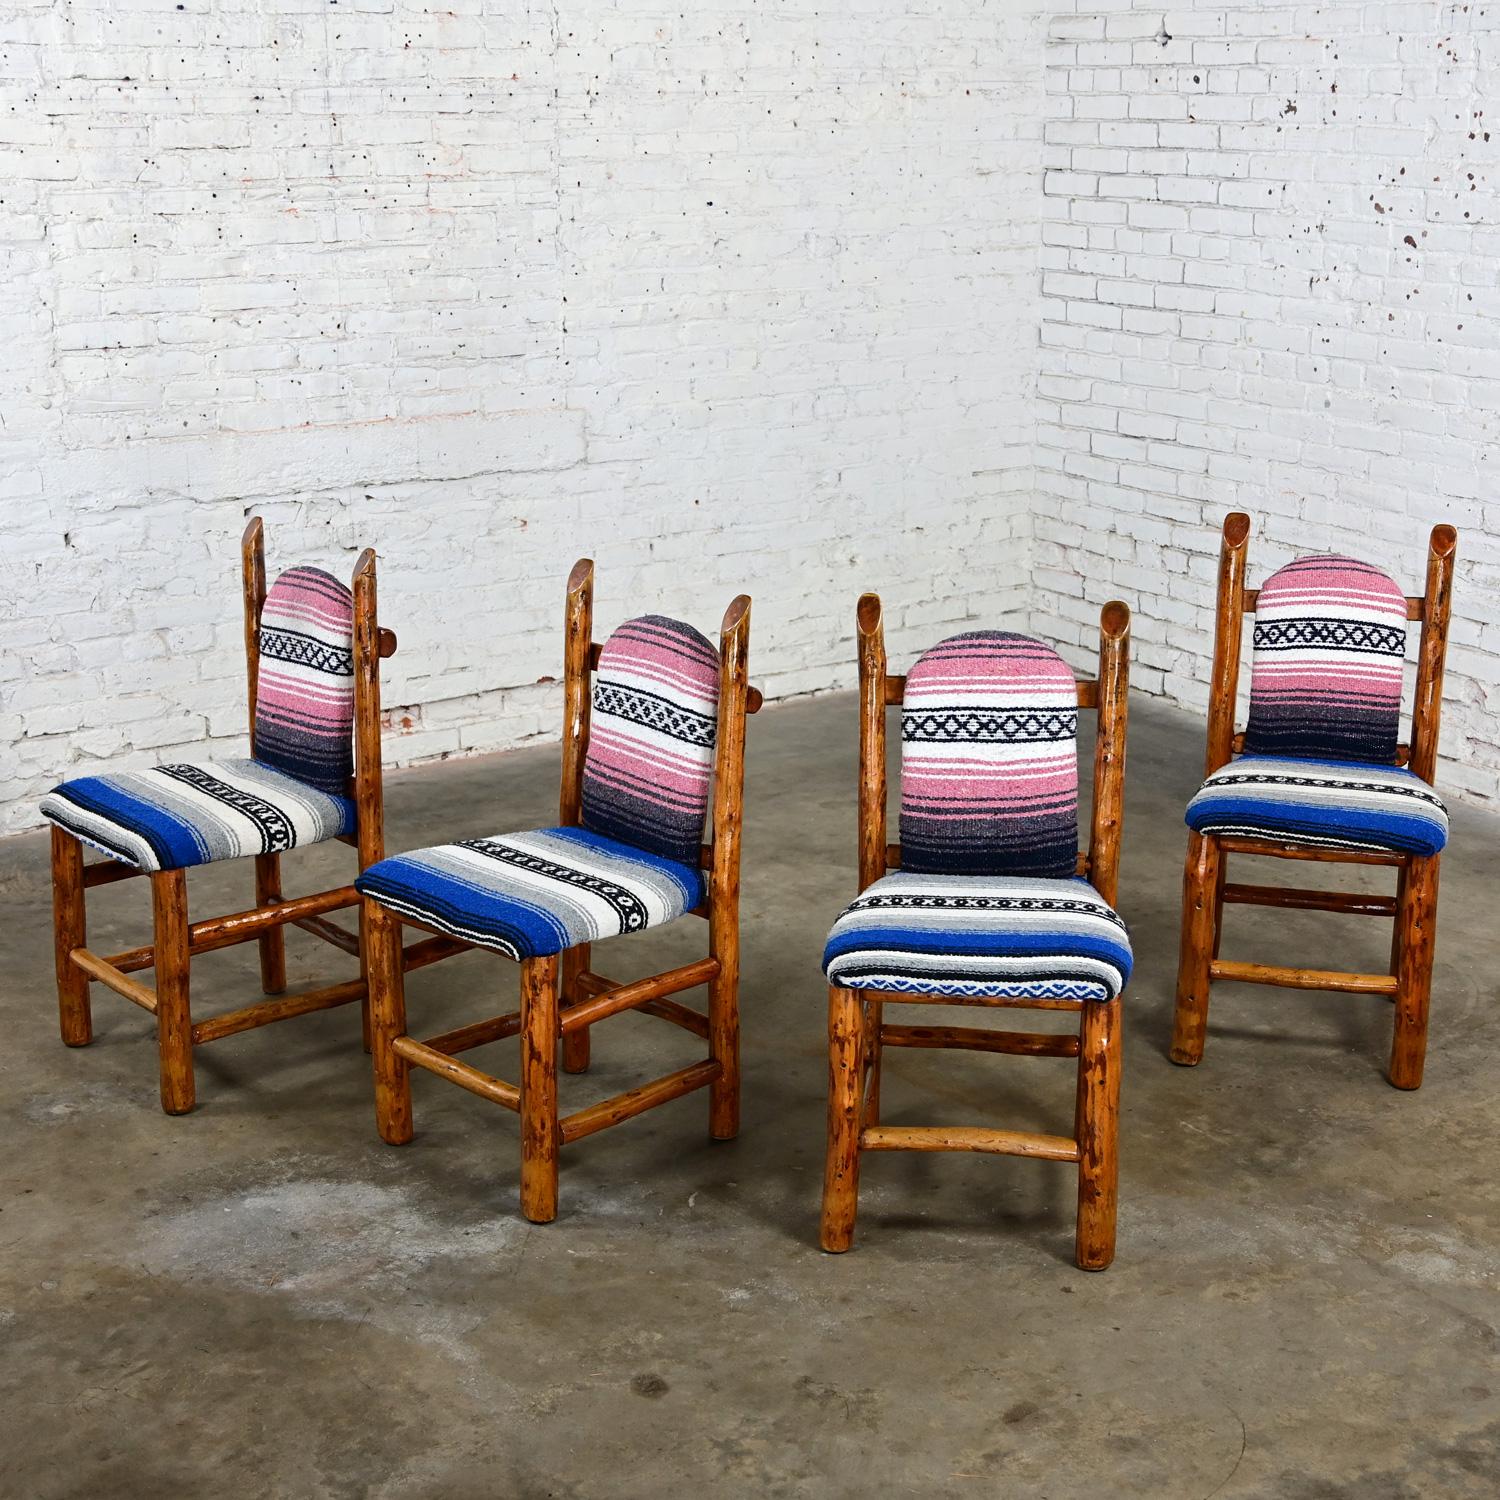 Handsome vintage Rustic natural log frame dining chairs with traditional serape or jorango blanket upholstered seats & backs. Beautiful condition, keeping in mind these are vintage and not new so will have signs of use and wear even if it has been